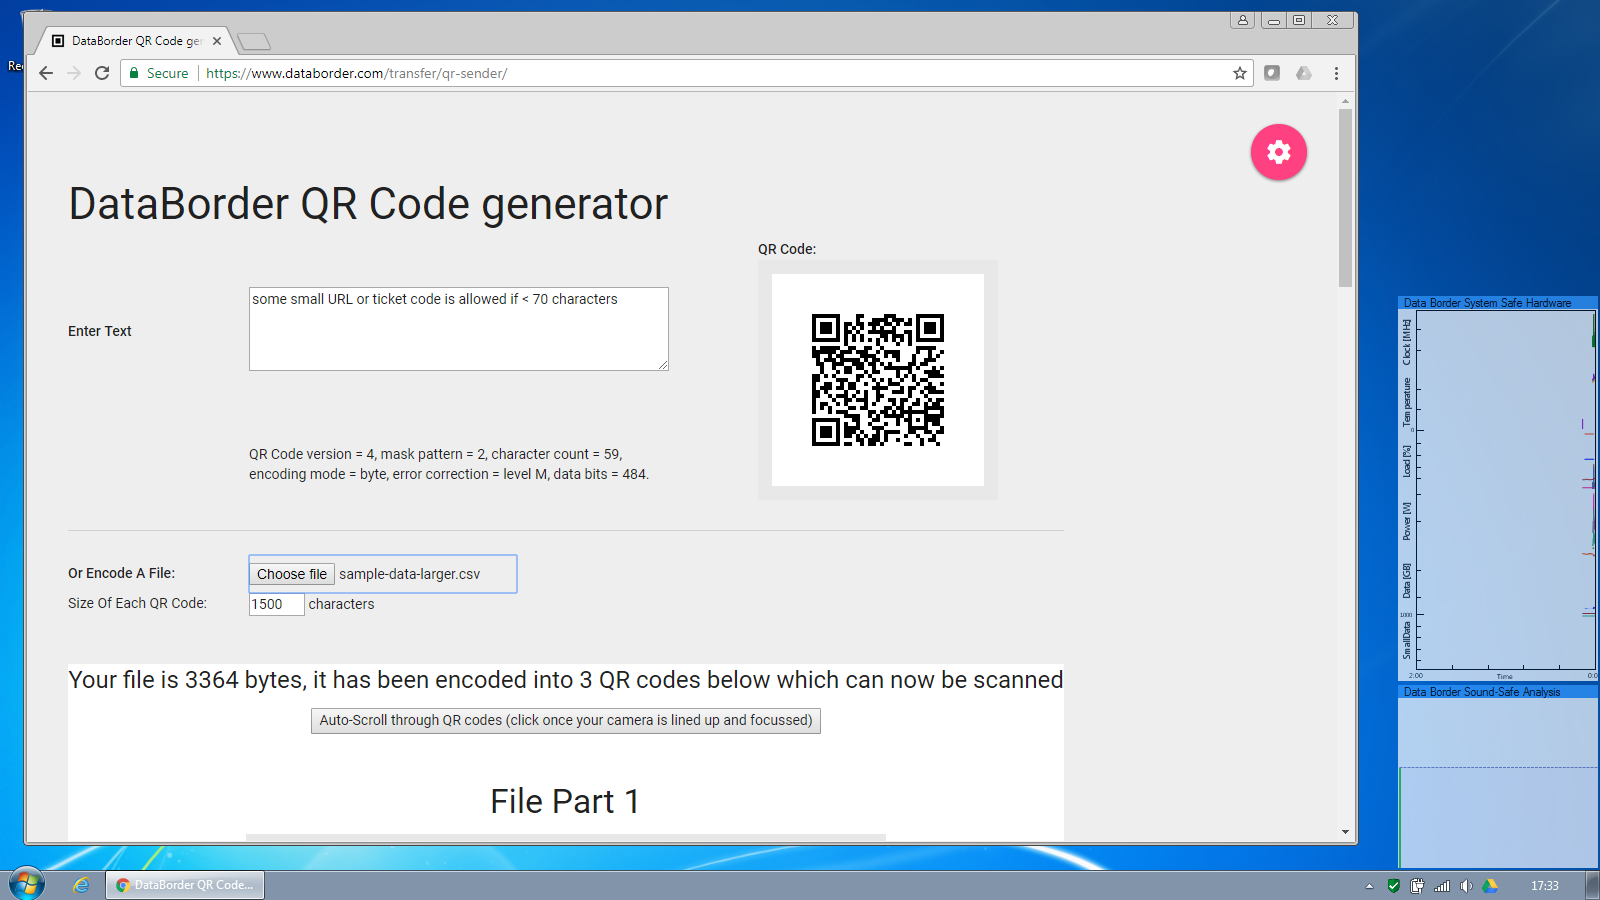 Small QR codes can optionally be allowed